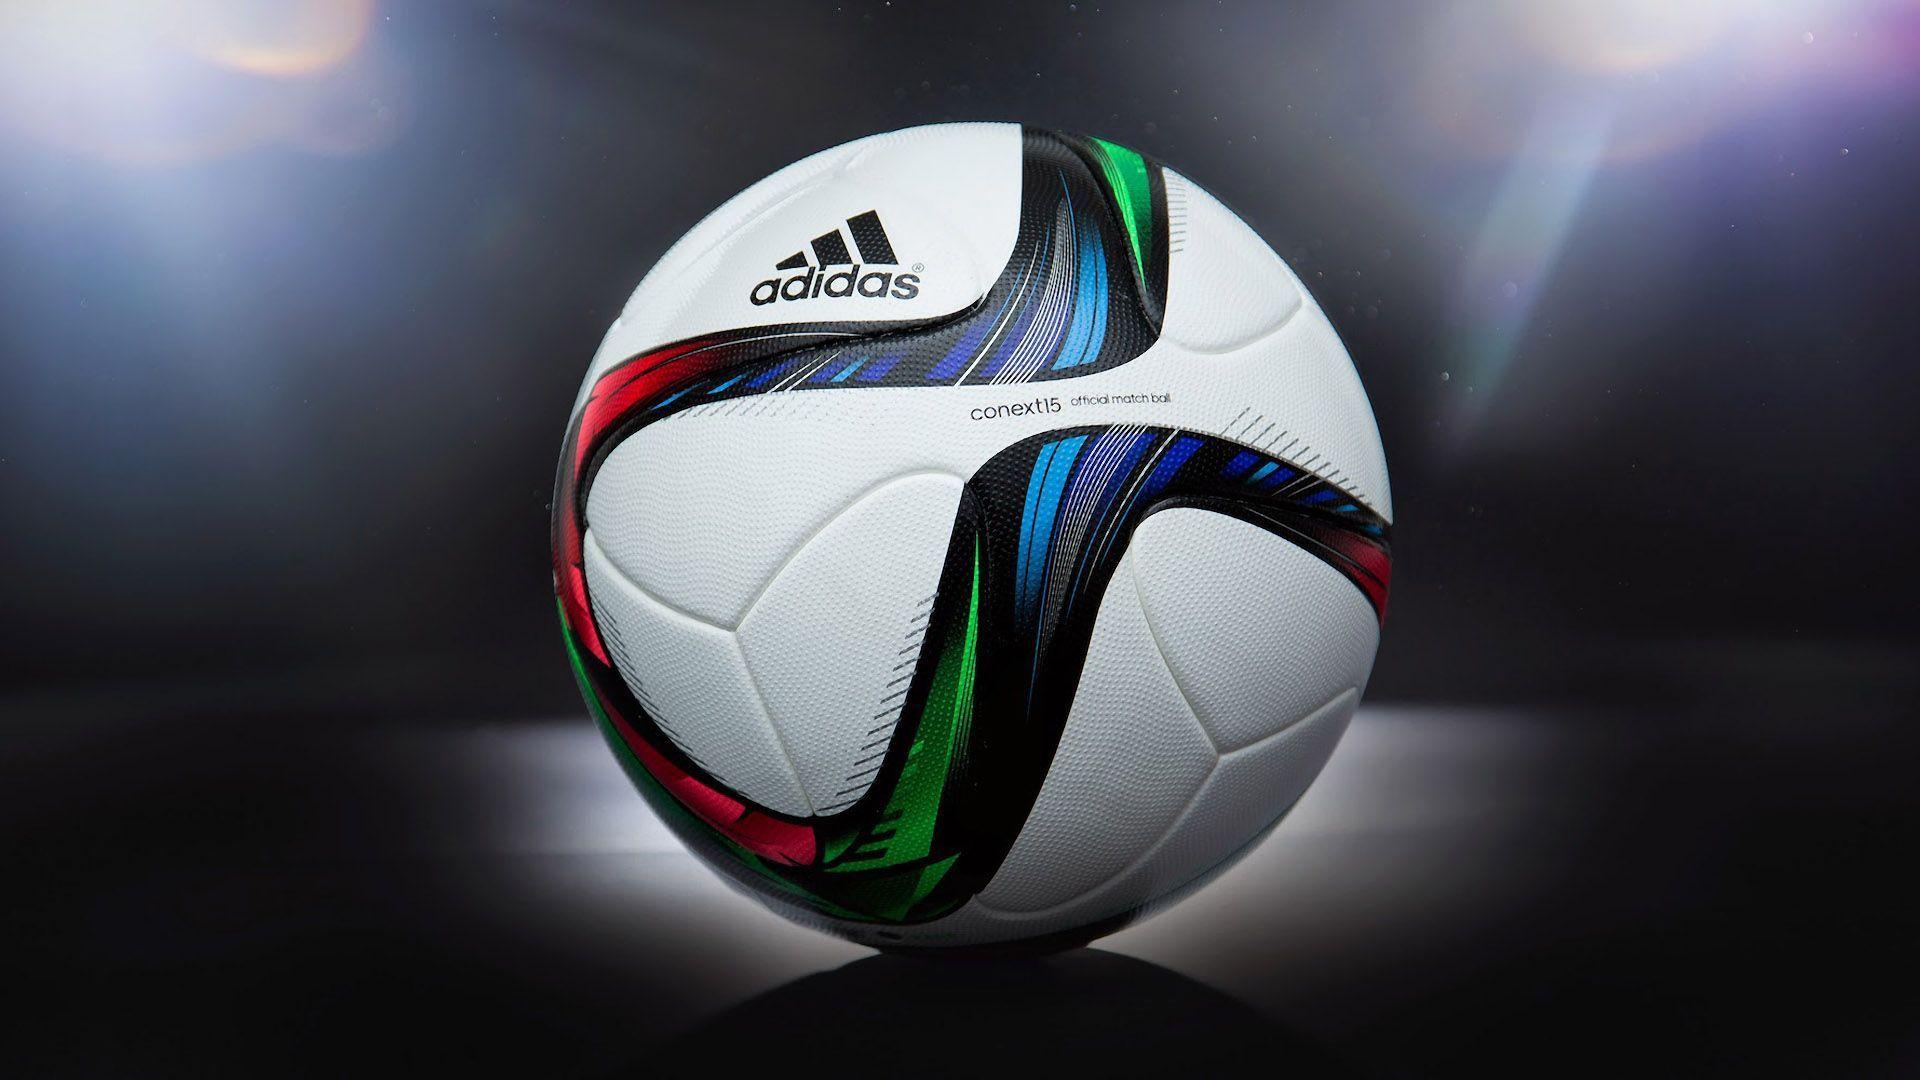 Adidas Conext 15 Ball Wallpaper Wide or HD